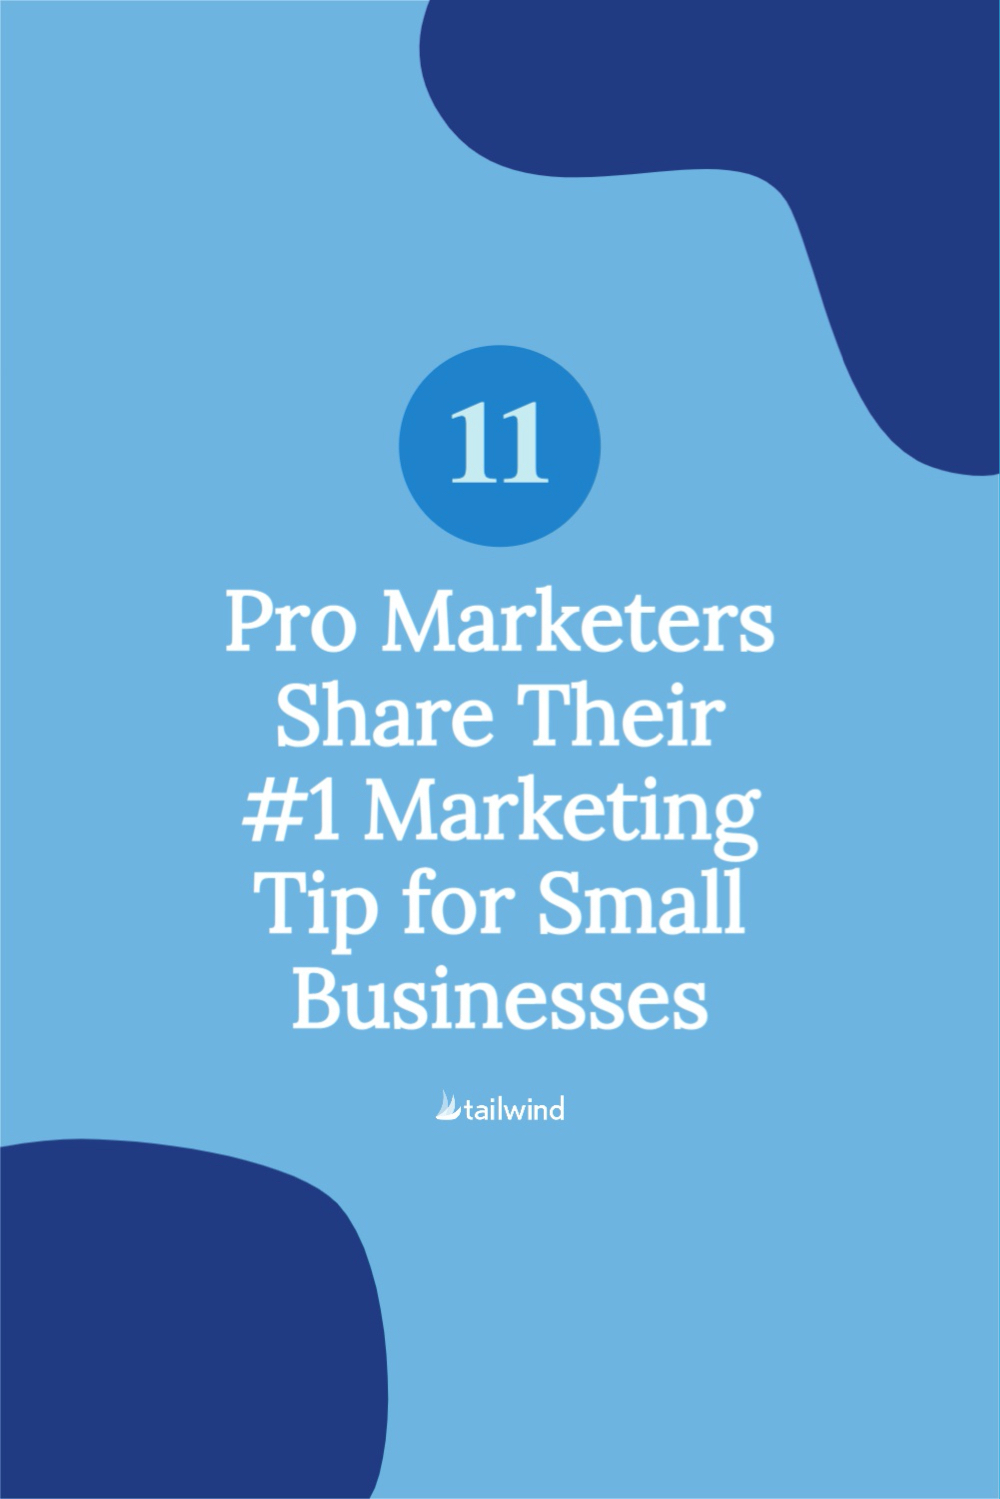 11 Pro Marketers Share Their Top Tips for Small Business Marketing